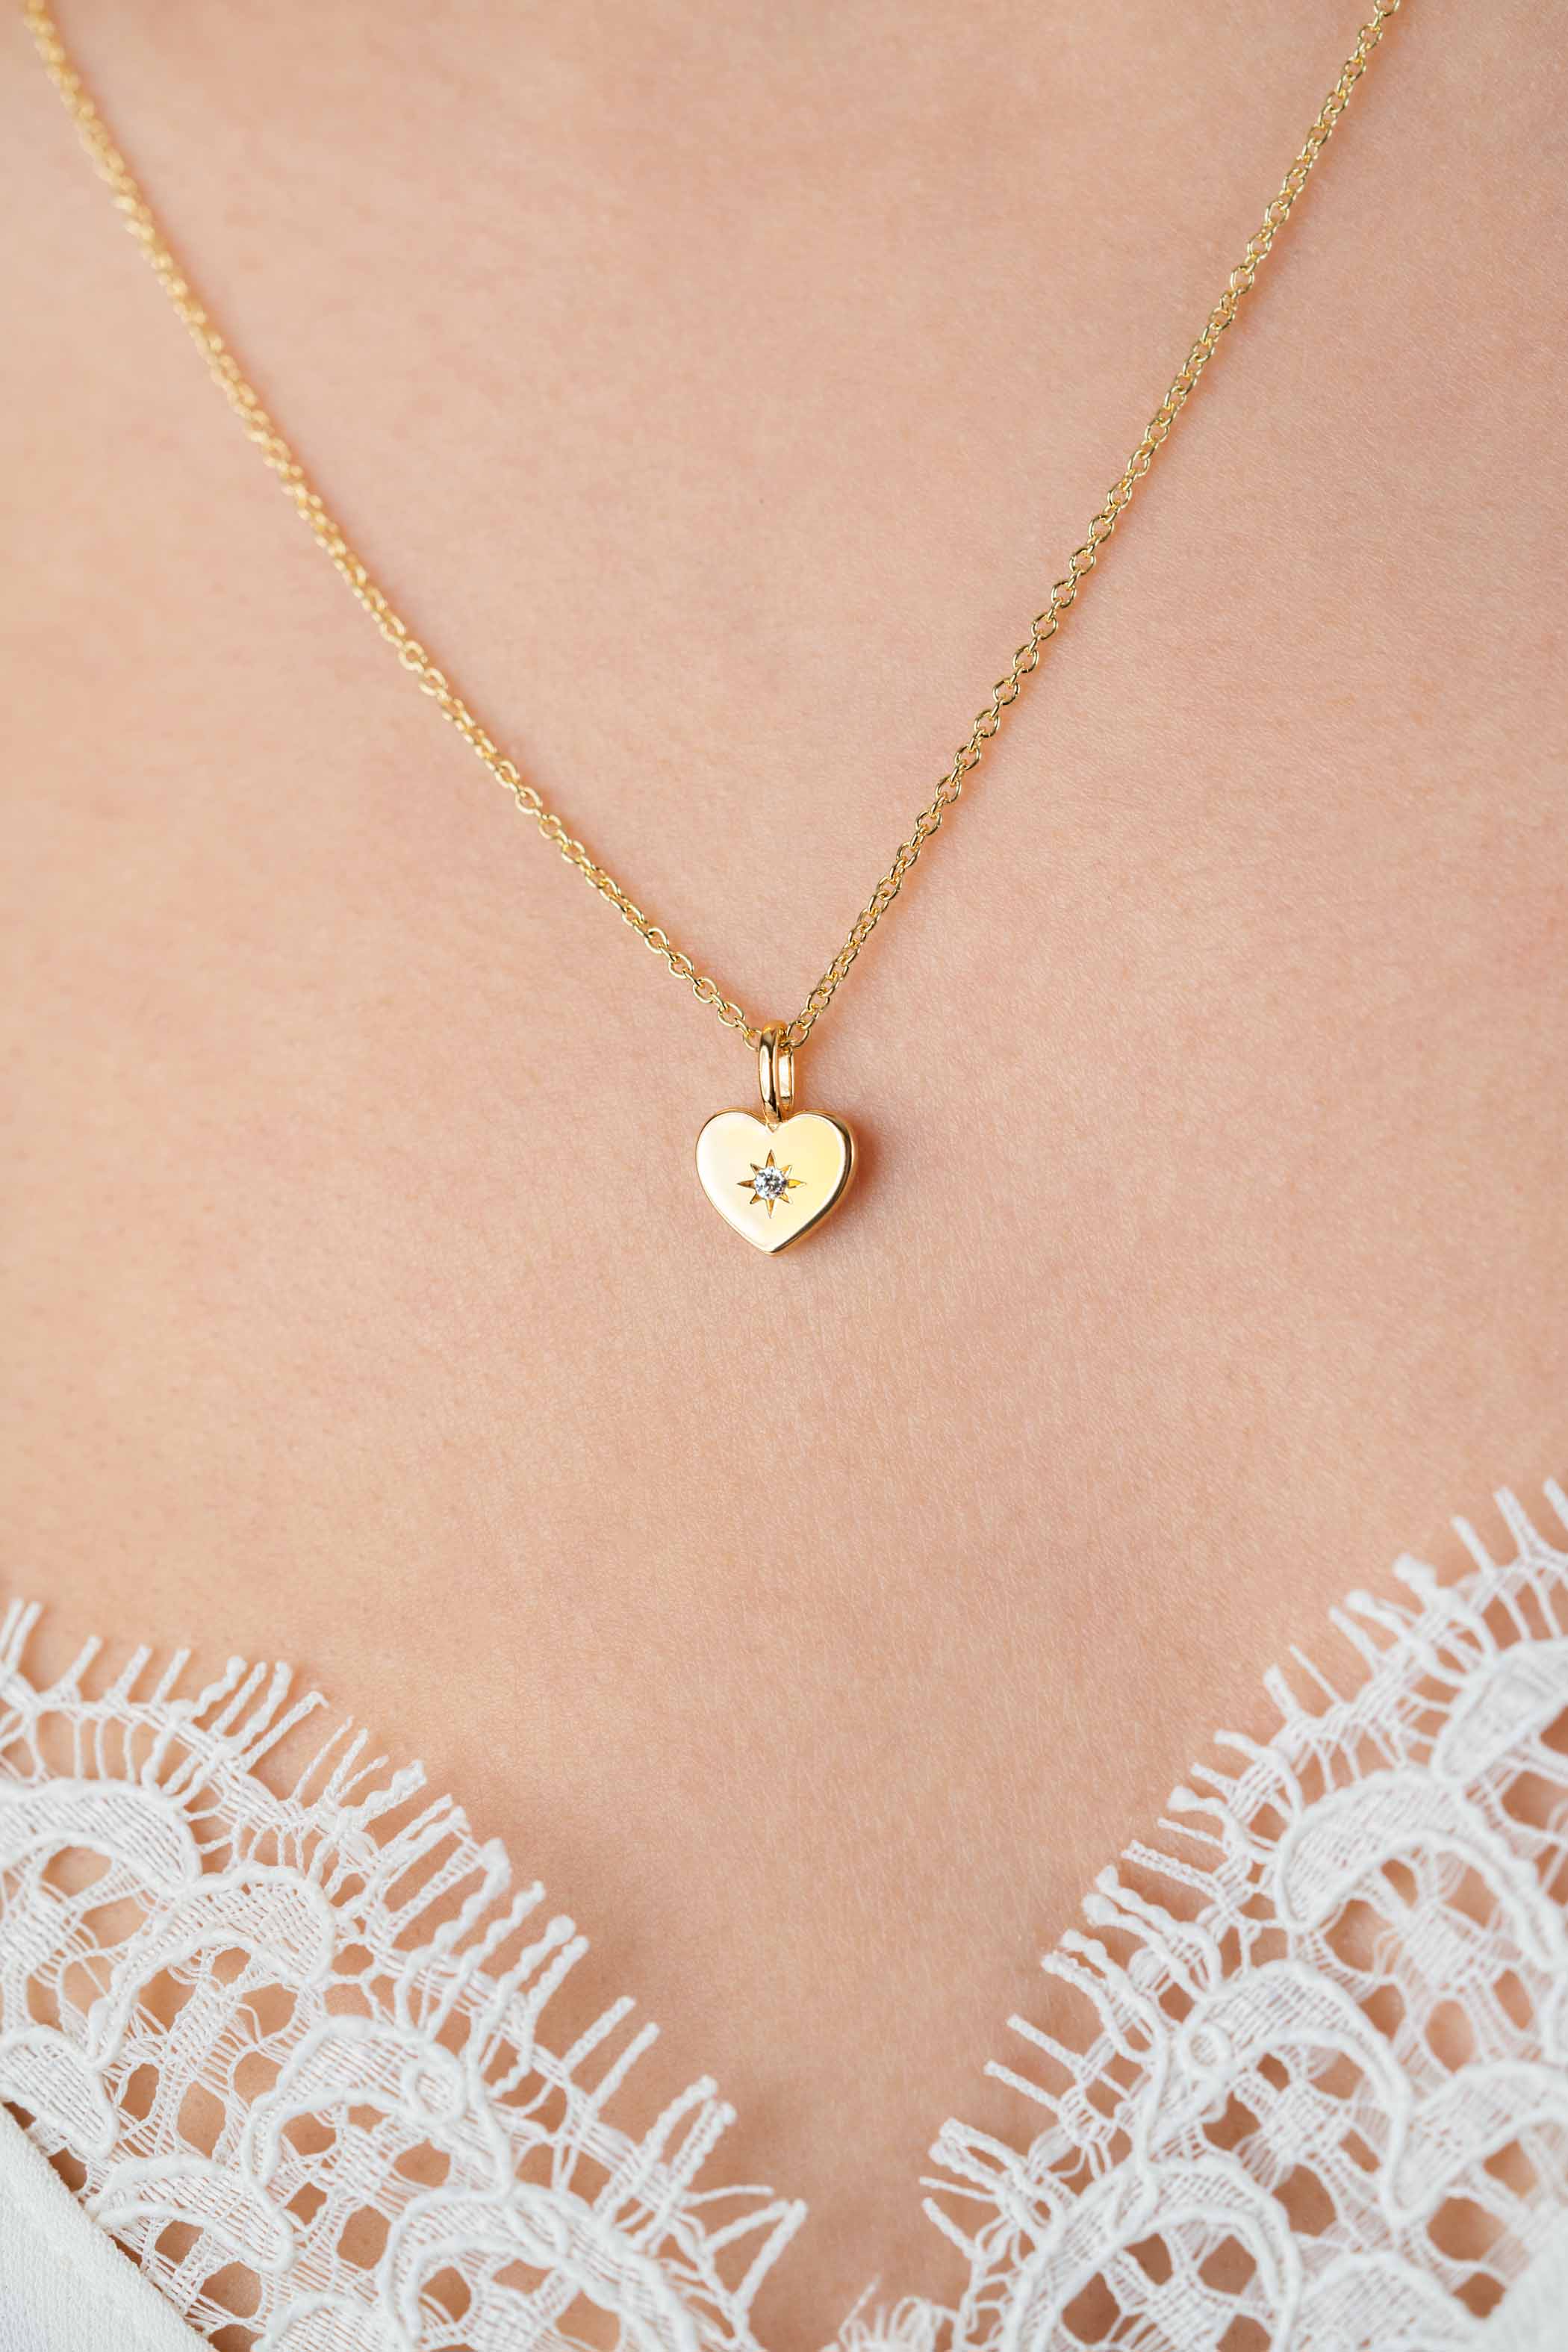 APRIL Pendant 12mm Gold Plated Heart Birthstone Diamond White Zirconia (excl. necklace)